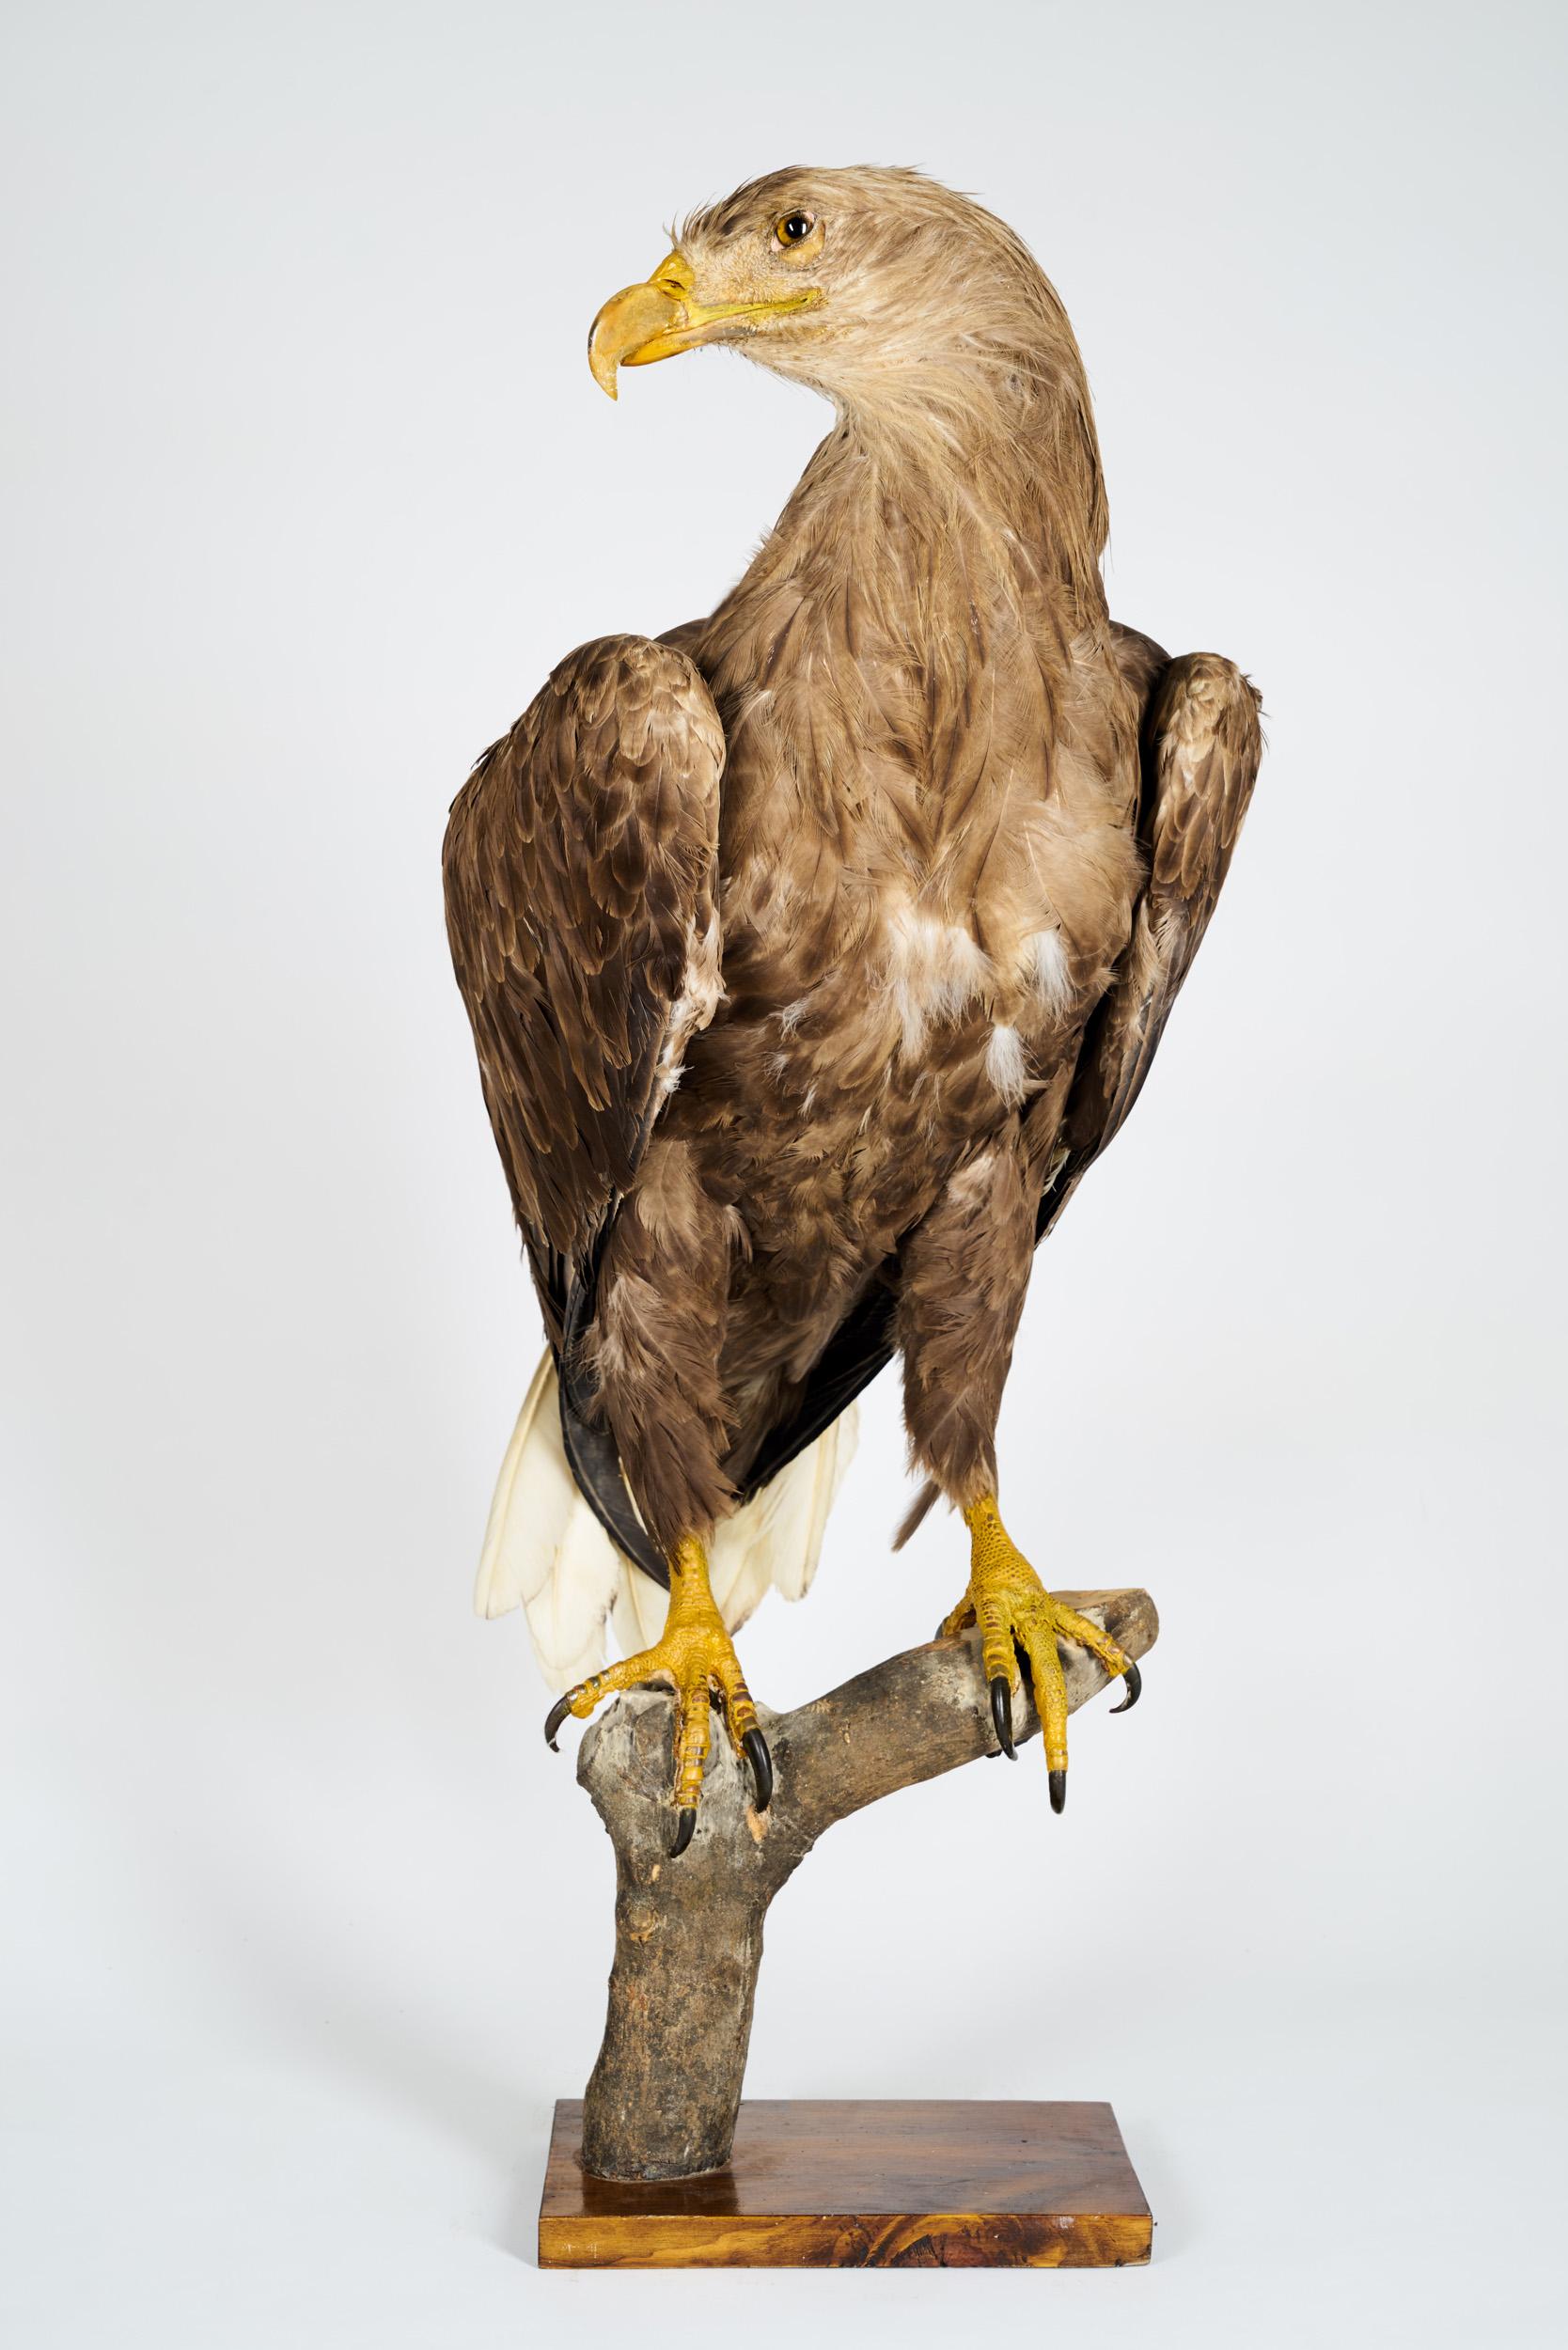 The White-Tailed Eagle (Haliaeetus albicilla) is a bird of prey that feeds itself mainly with fish, but it also hunts on birds, rabbits and hares. Sometimes the White-Tailed Eagle pirates food from other birds or otters. The body feathers of this